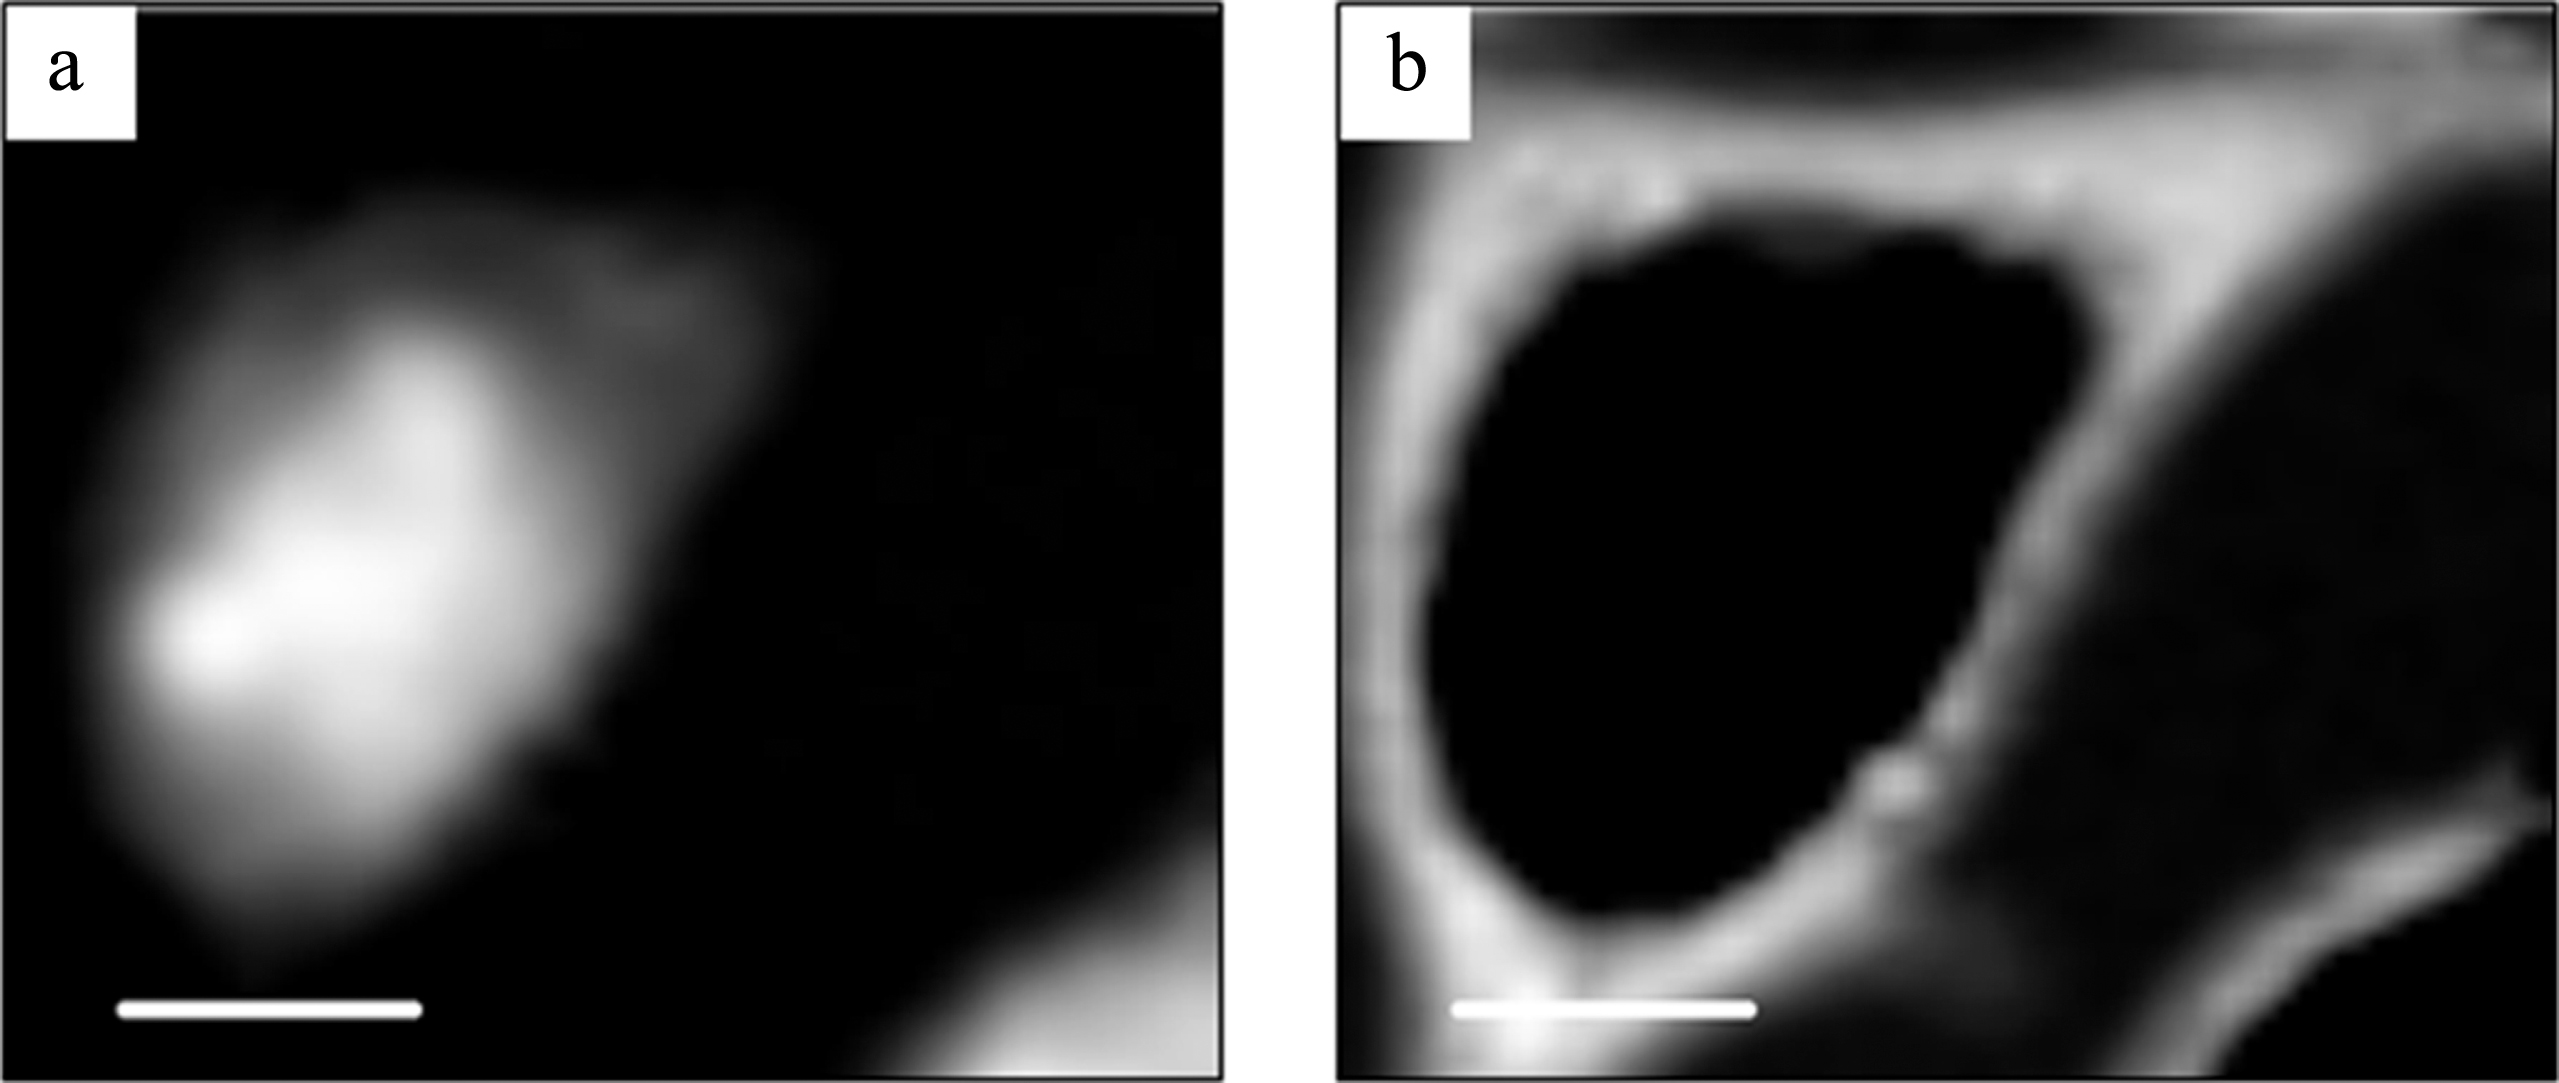 DNA (a) and RNA (b) images obtained by the SVD method in aXis2000 program. The scale bar is 5μm.